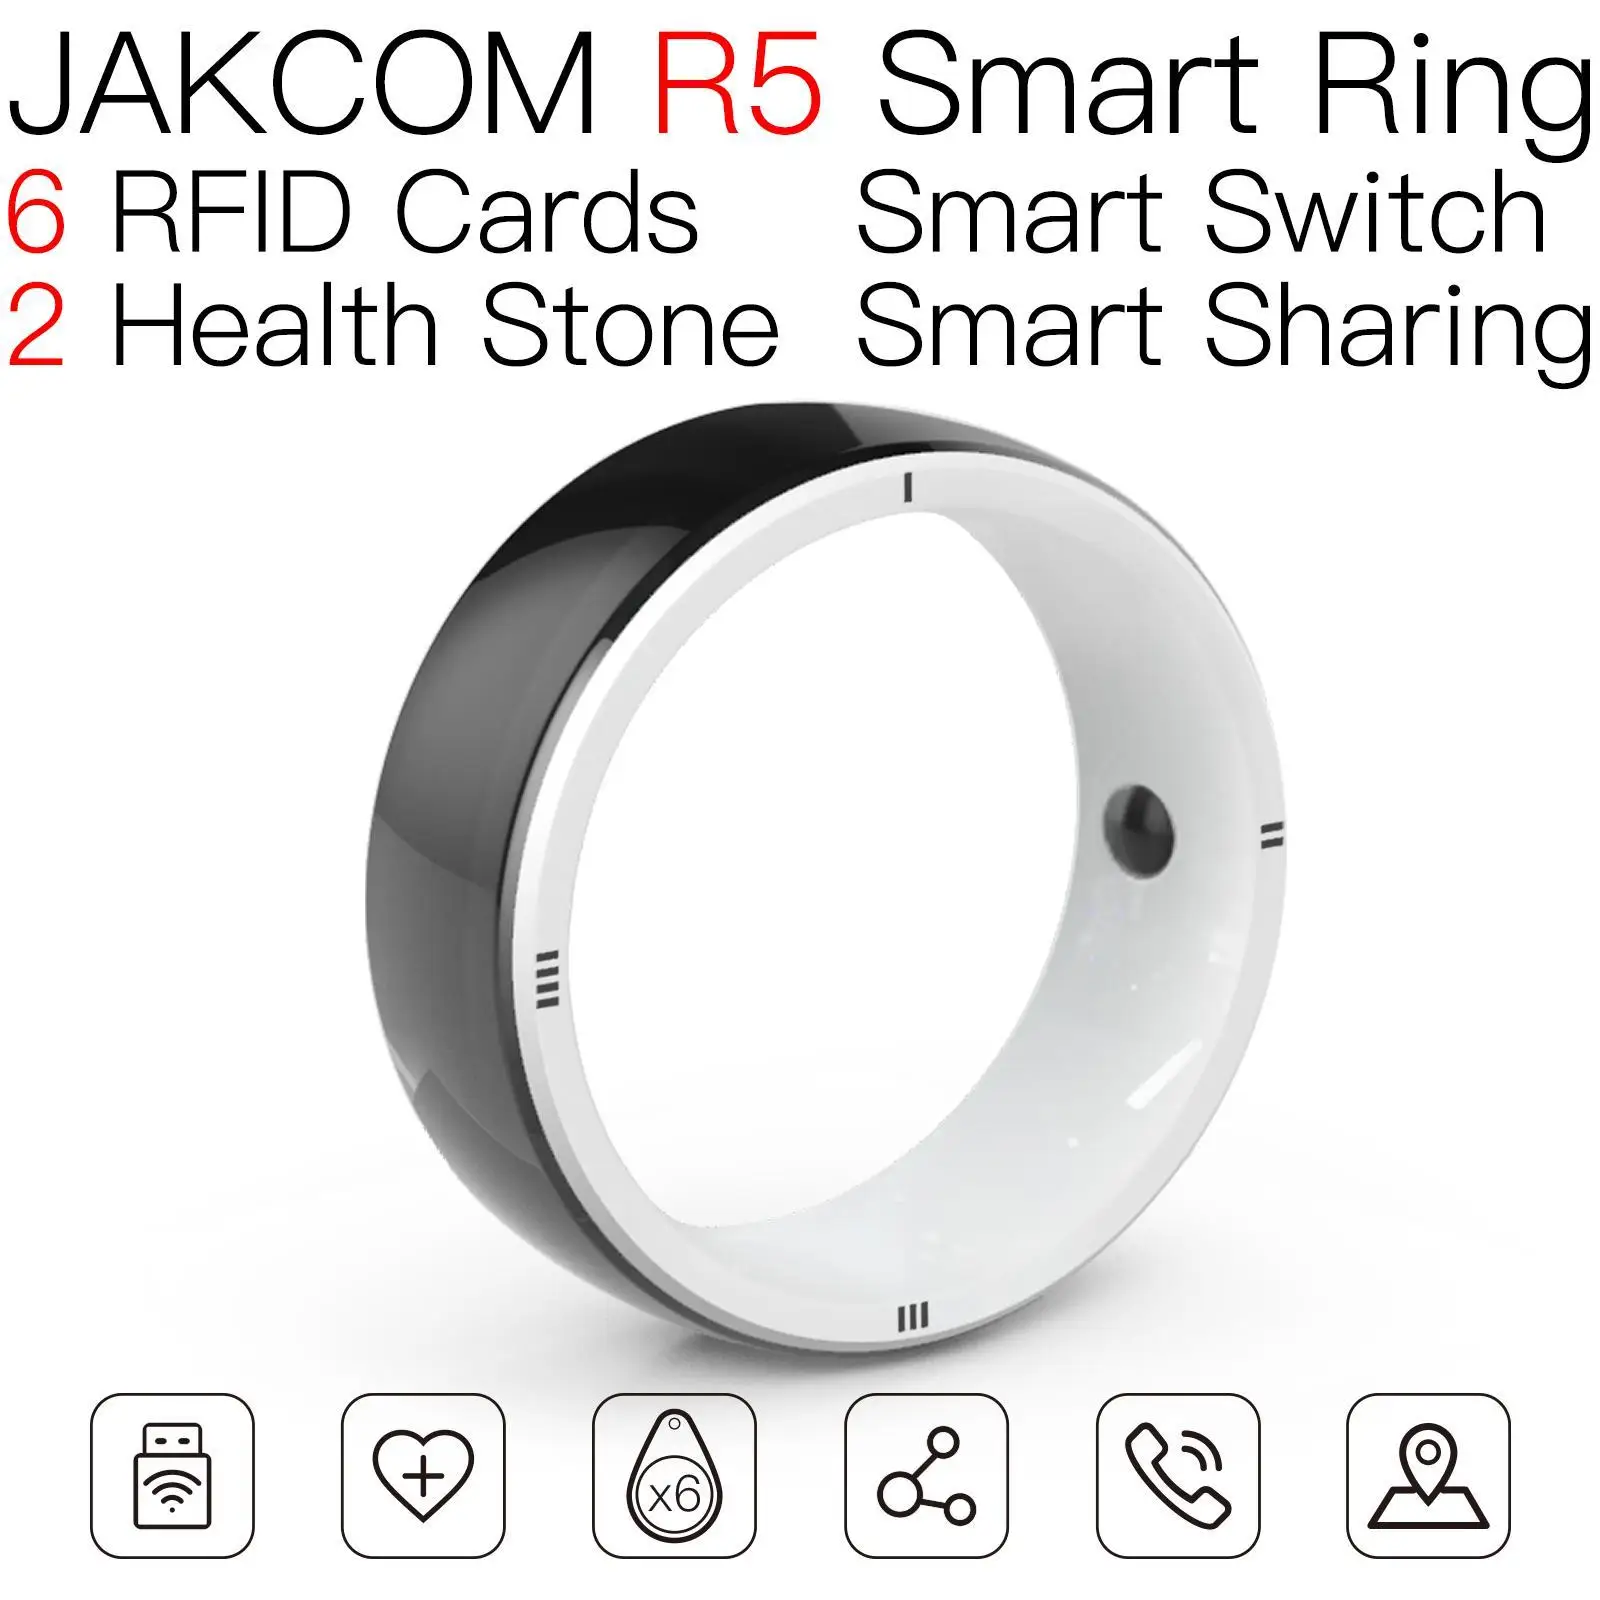 

JAKCOM R5 Smart Ring Best gift with reader outdoor wiegand 26 rs232 iso14443a rf read write em4305 clear nfc card rfid diameter